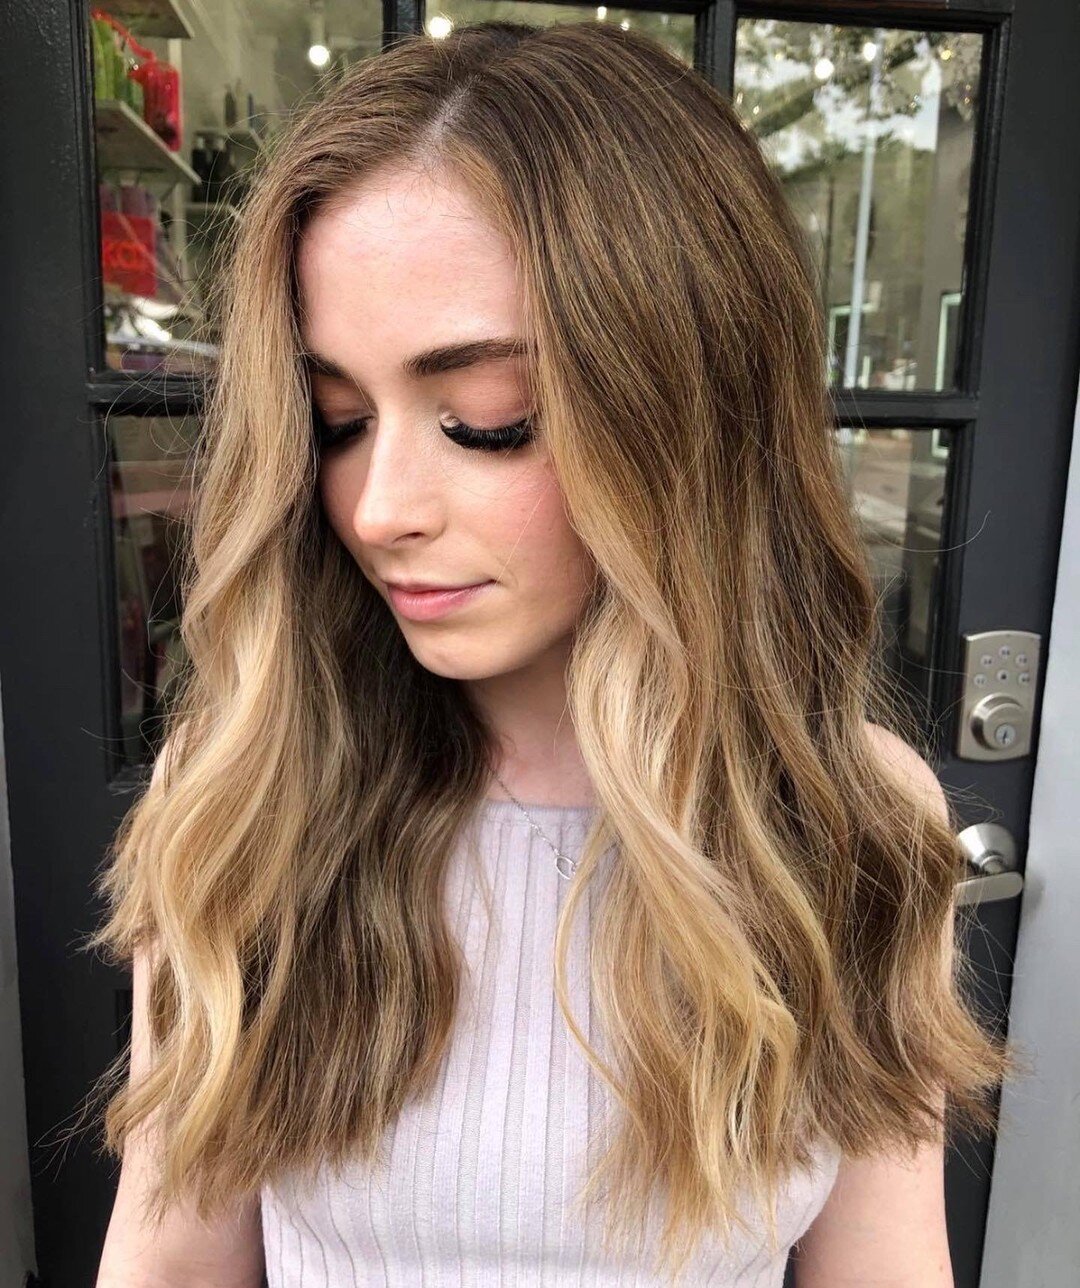 Oh, la, la.... by BHC Hair Artist, Kendra @beautybykendra.bhc⁠
⁠
#hairgoals #bristowhaircompany #instahair #roswellsalon ##newhairstyle #hairextensionspecialist #roswell #naturalbalayage #hairgame #handpaintedhair #newhairdontcare #masterofbalayage #